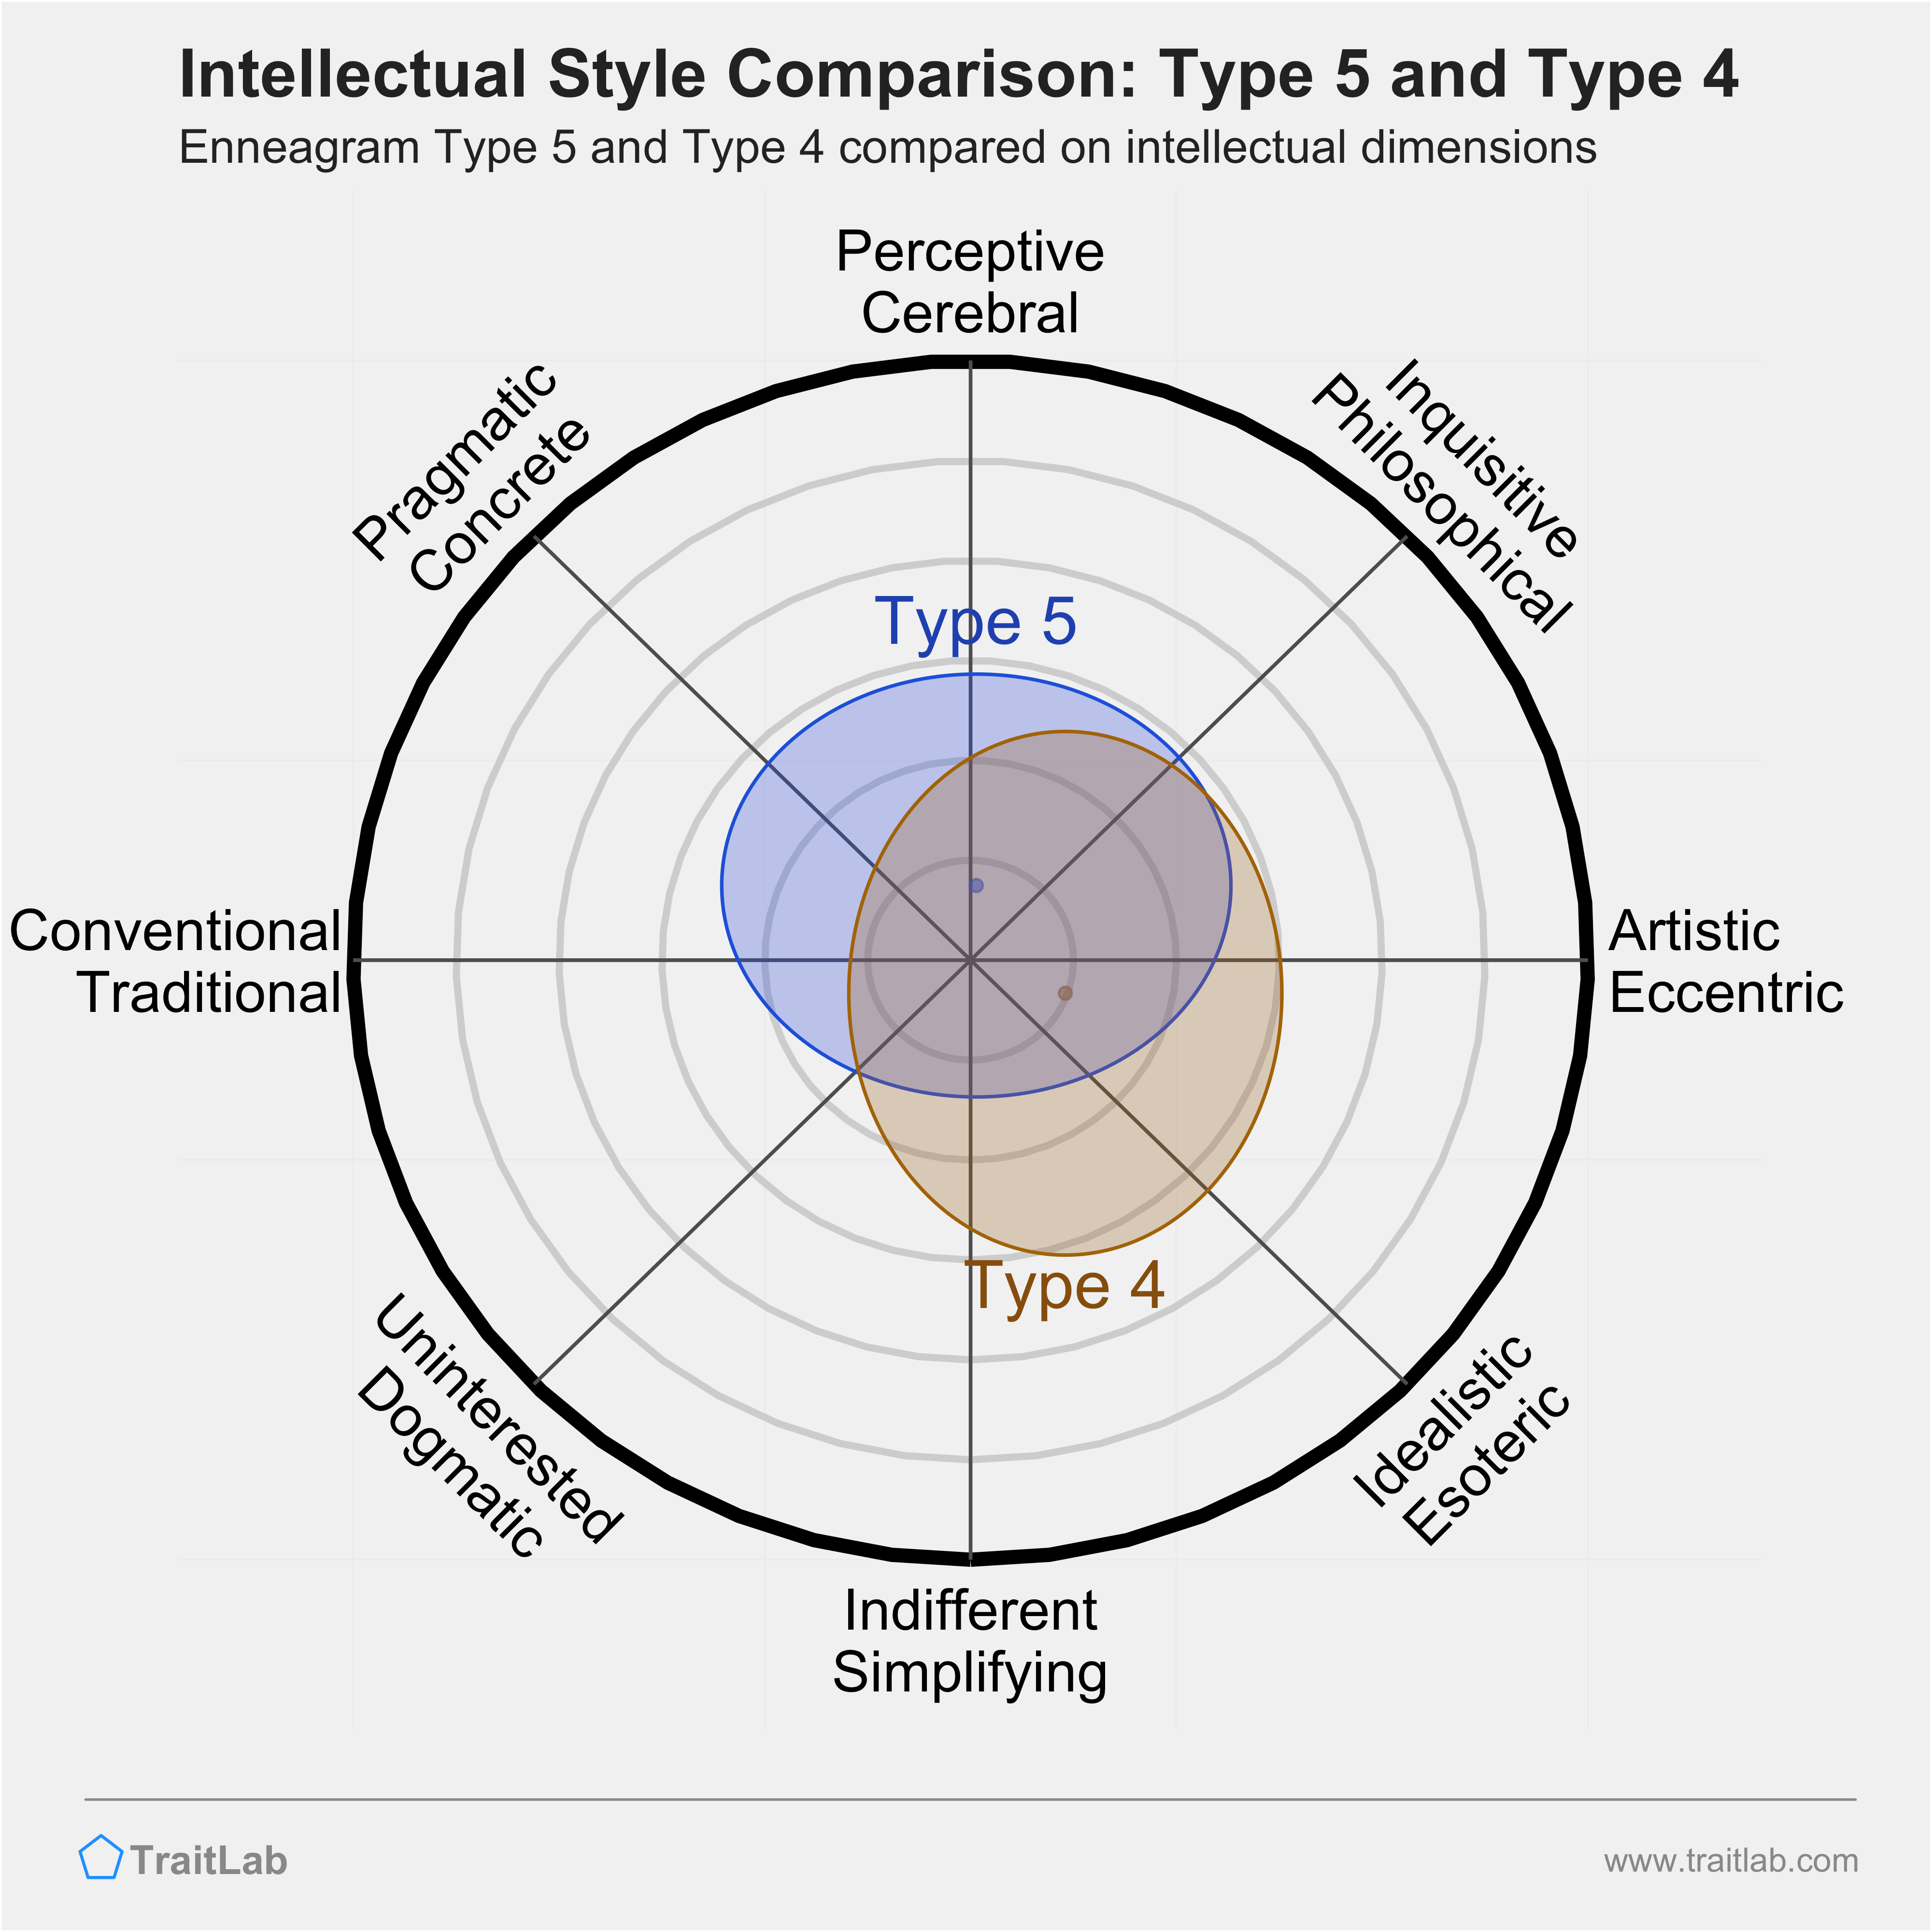 Type 5 and Type 4 comparison across intellectual dimensions